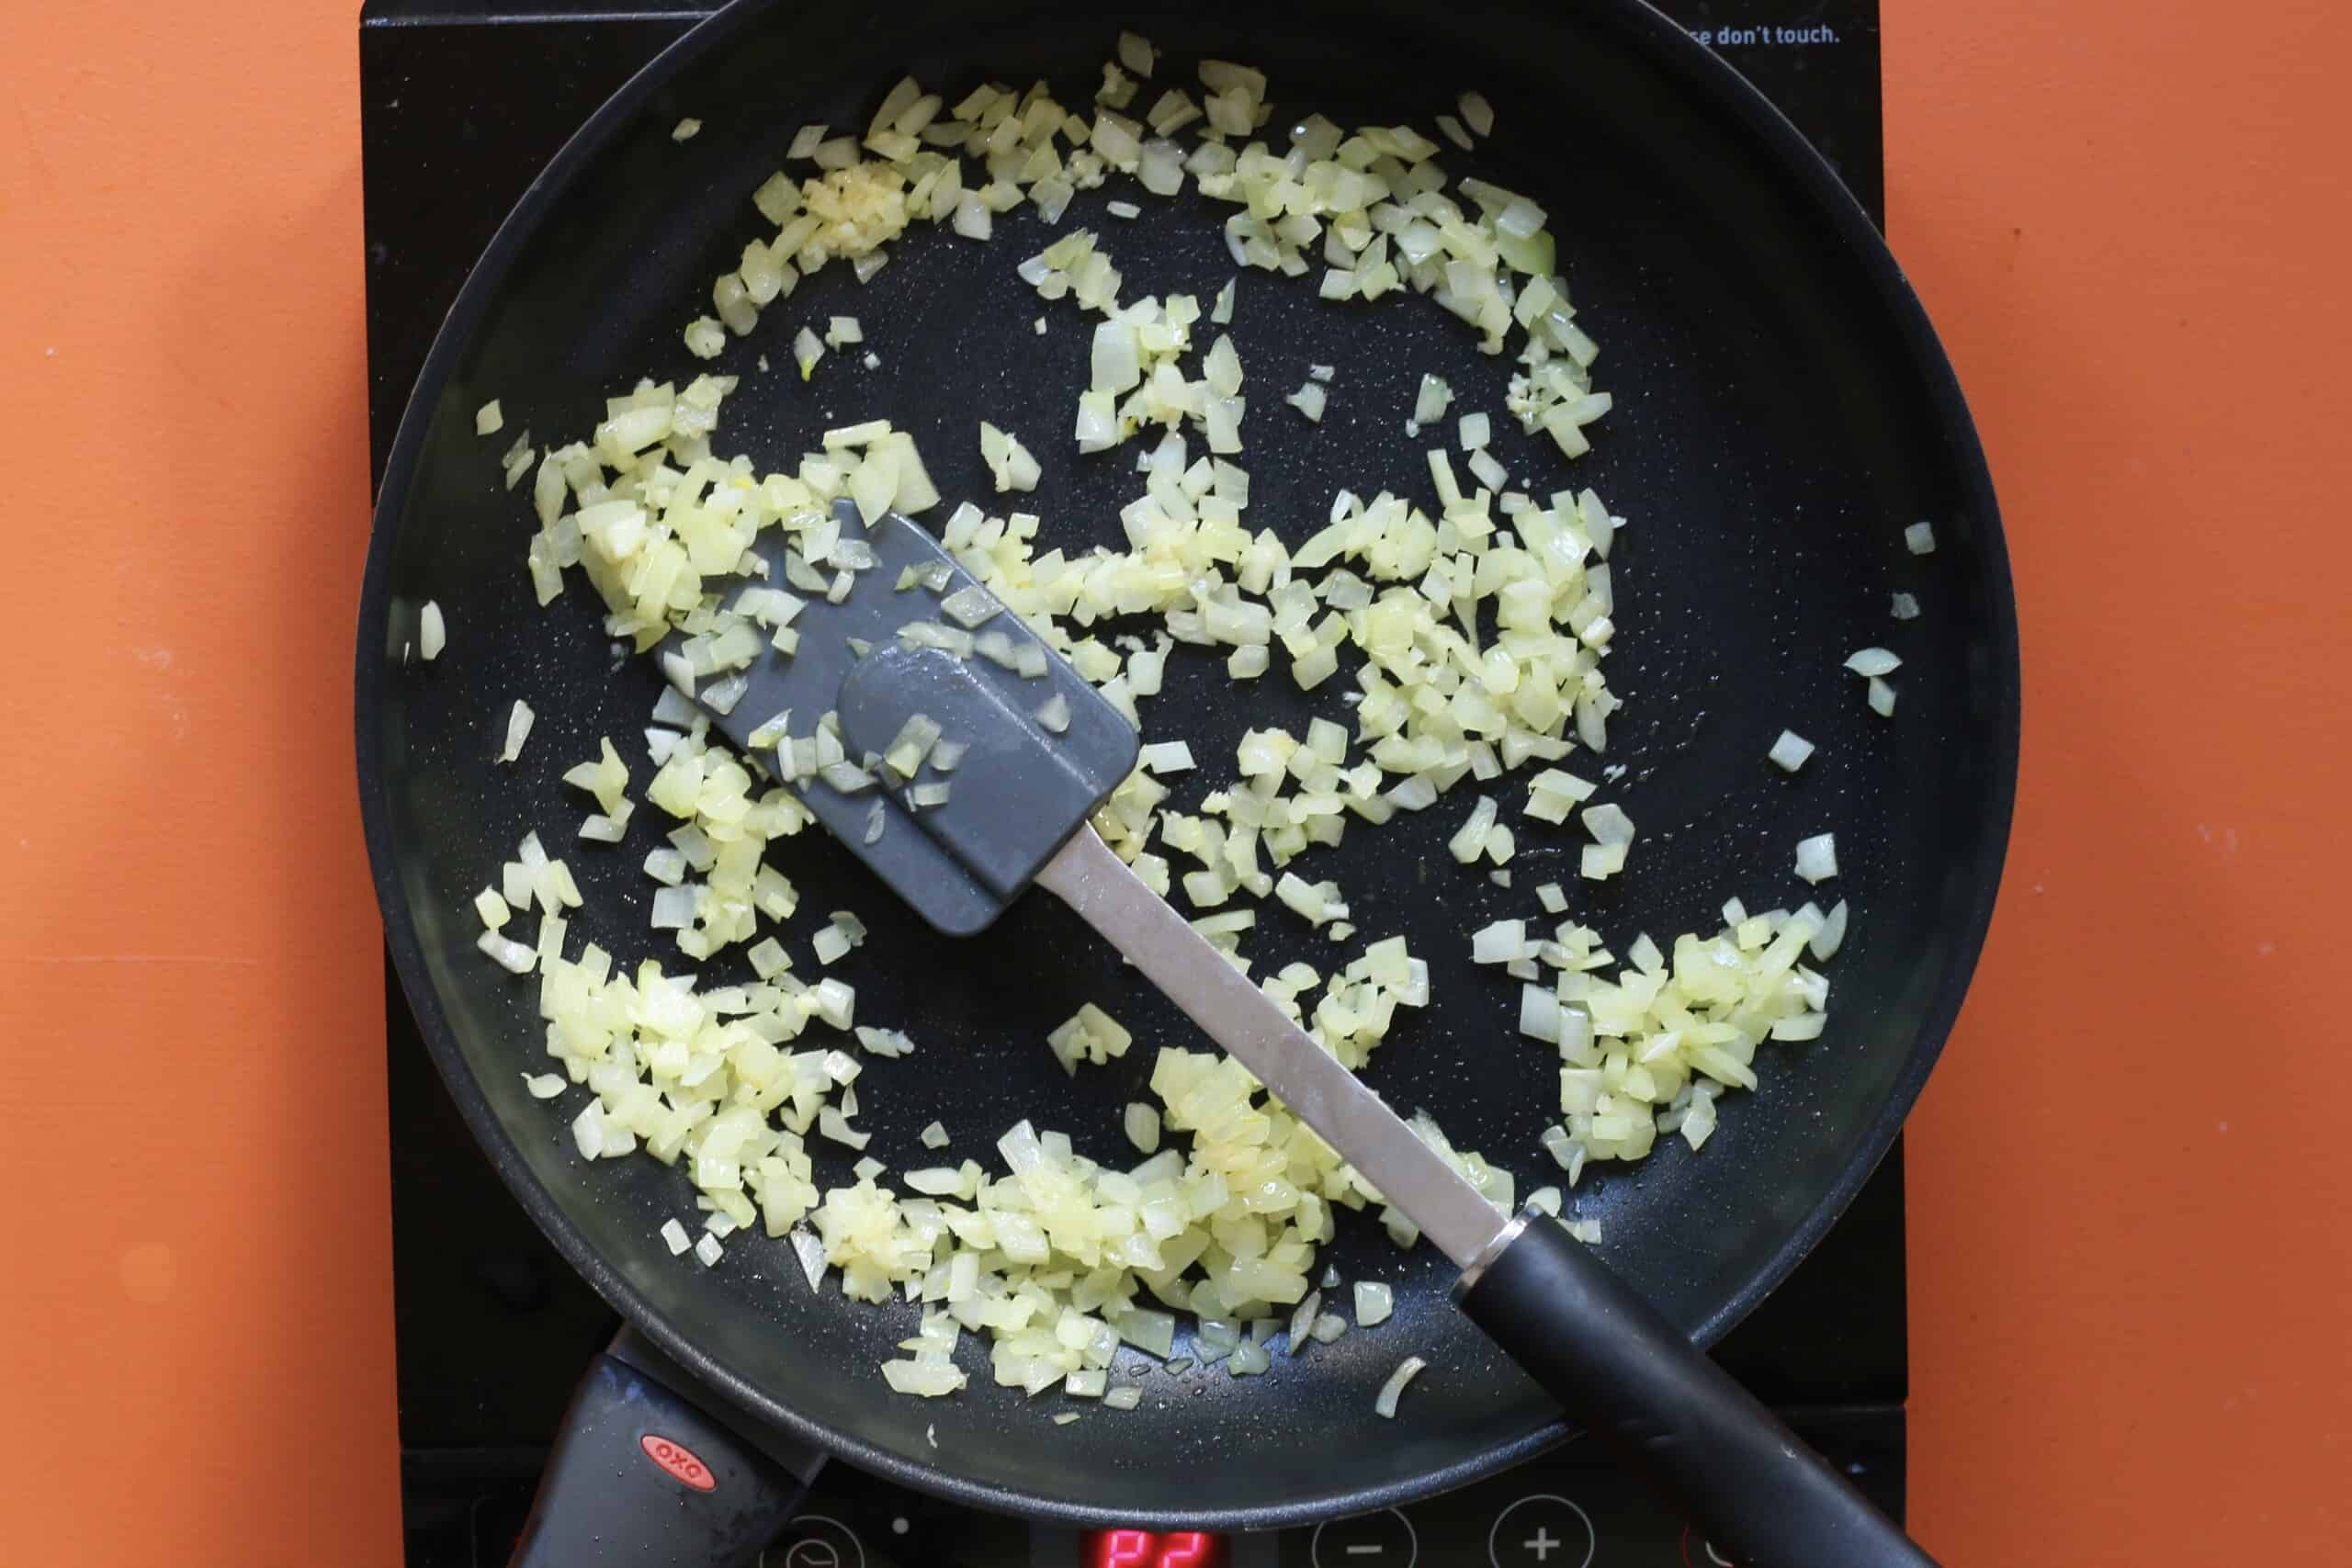 Diced onion sautéing in a frying pan  and stirred with a spatula on a stove on an orange background.